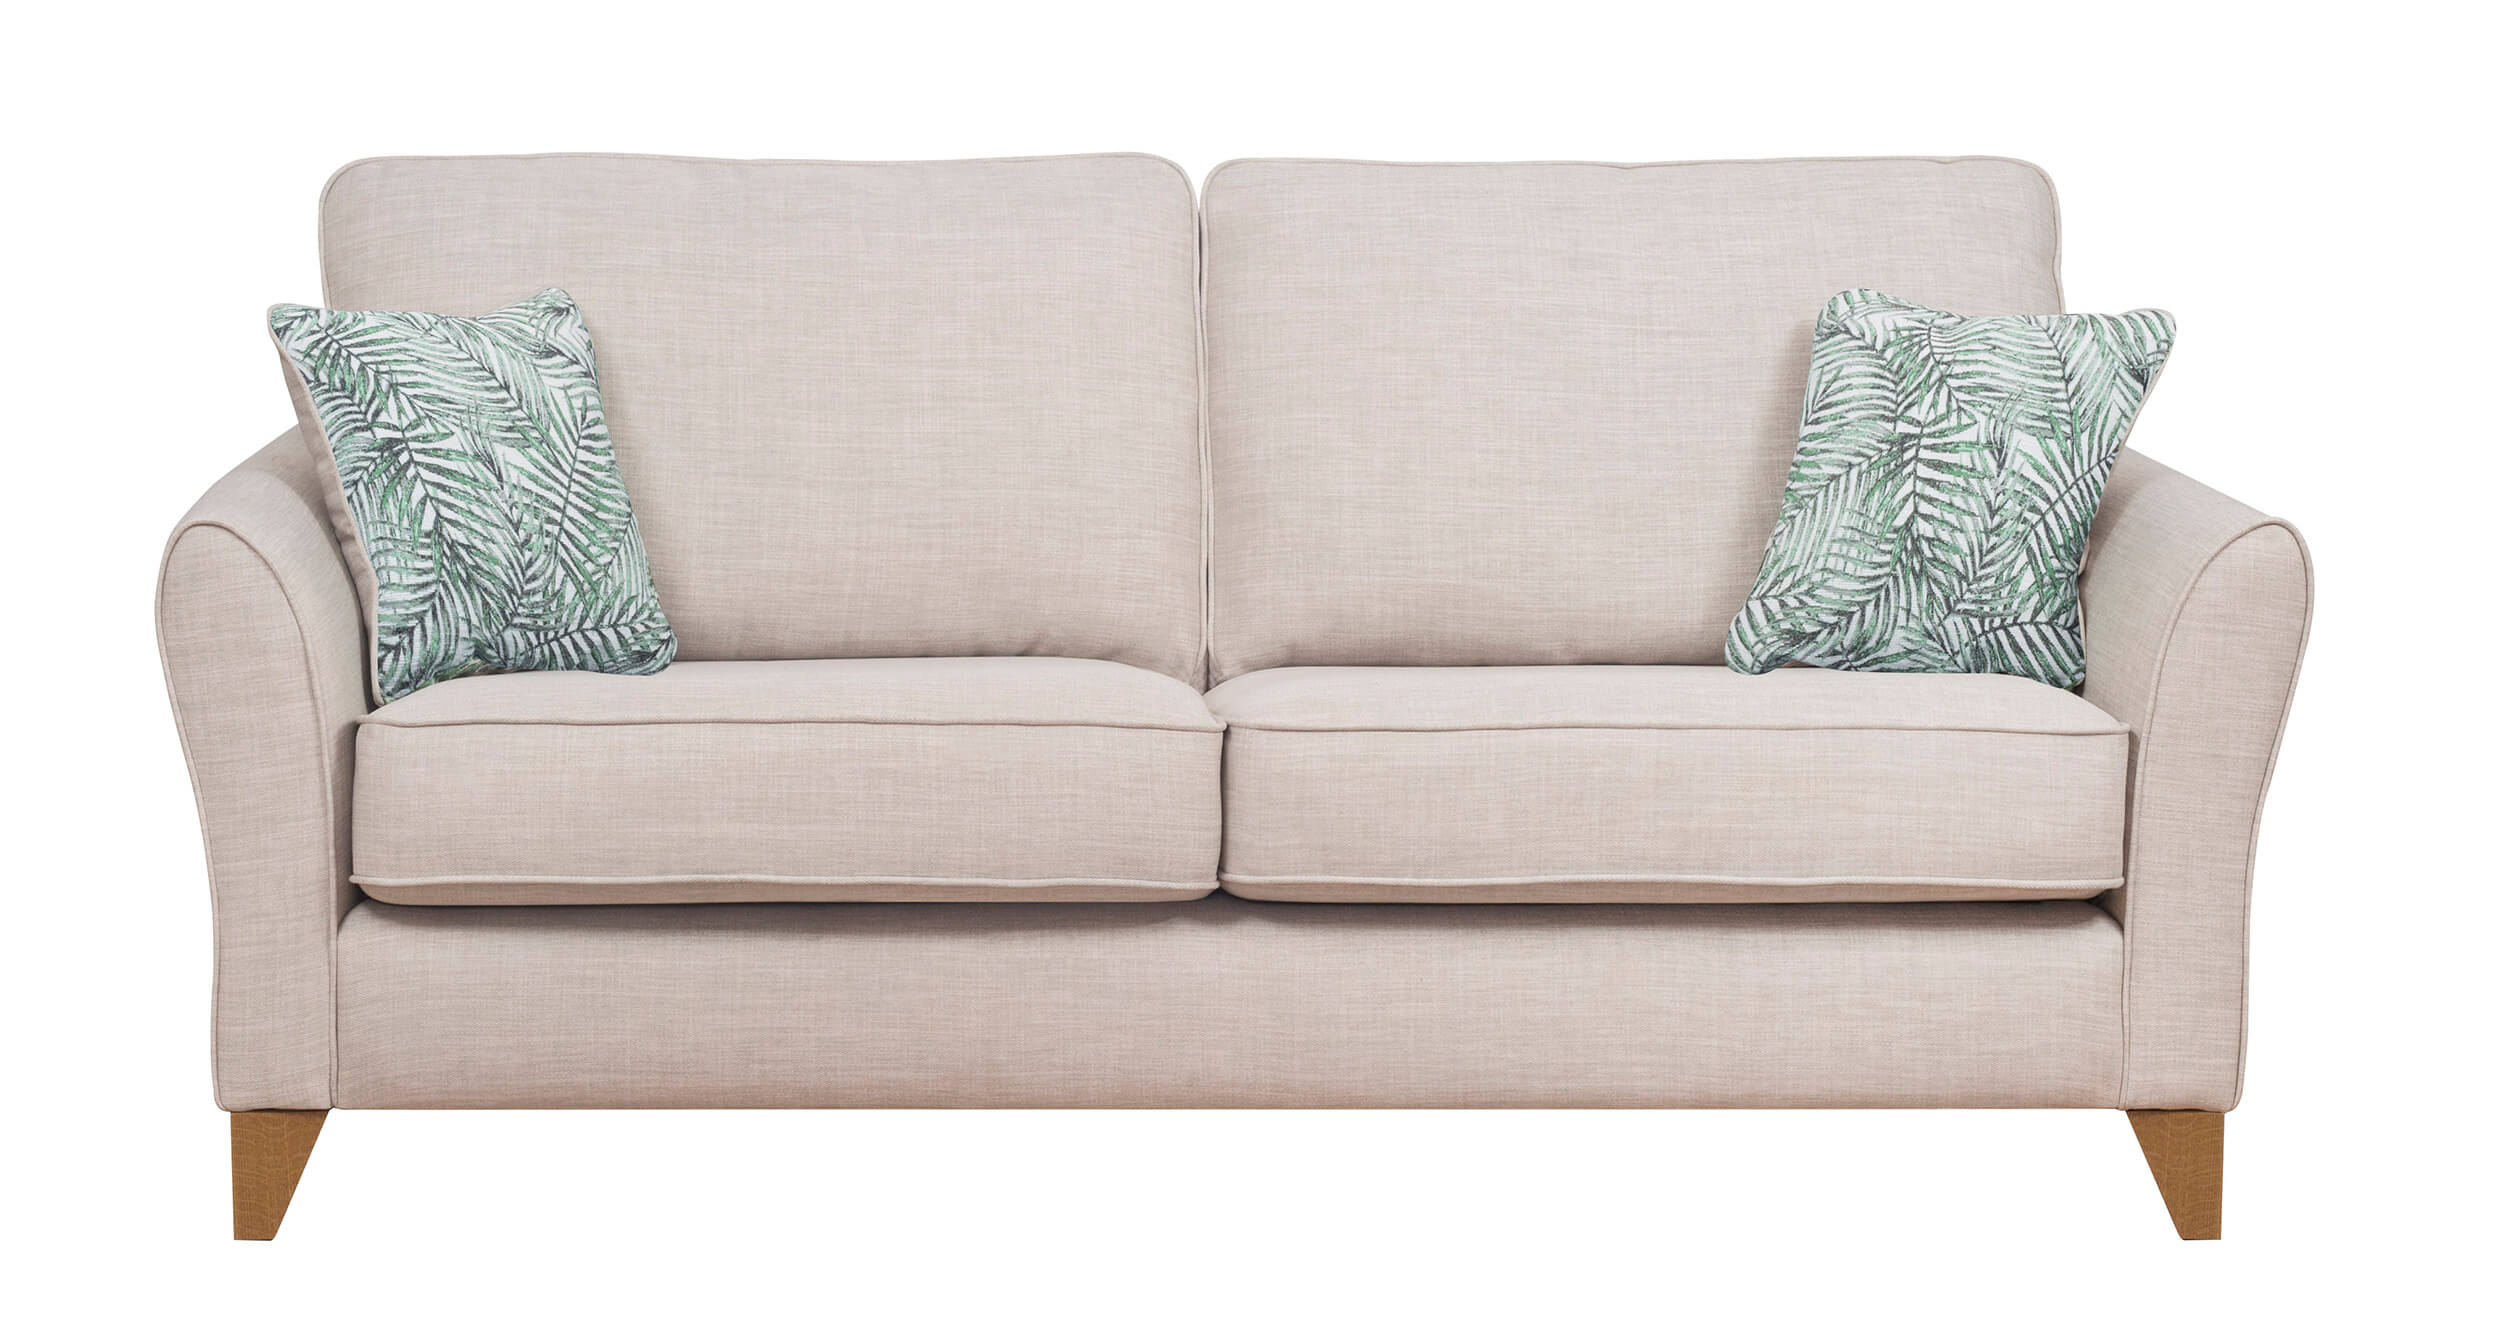 Showing image for Springfield 3-seater sofa